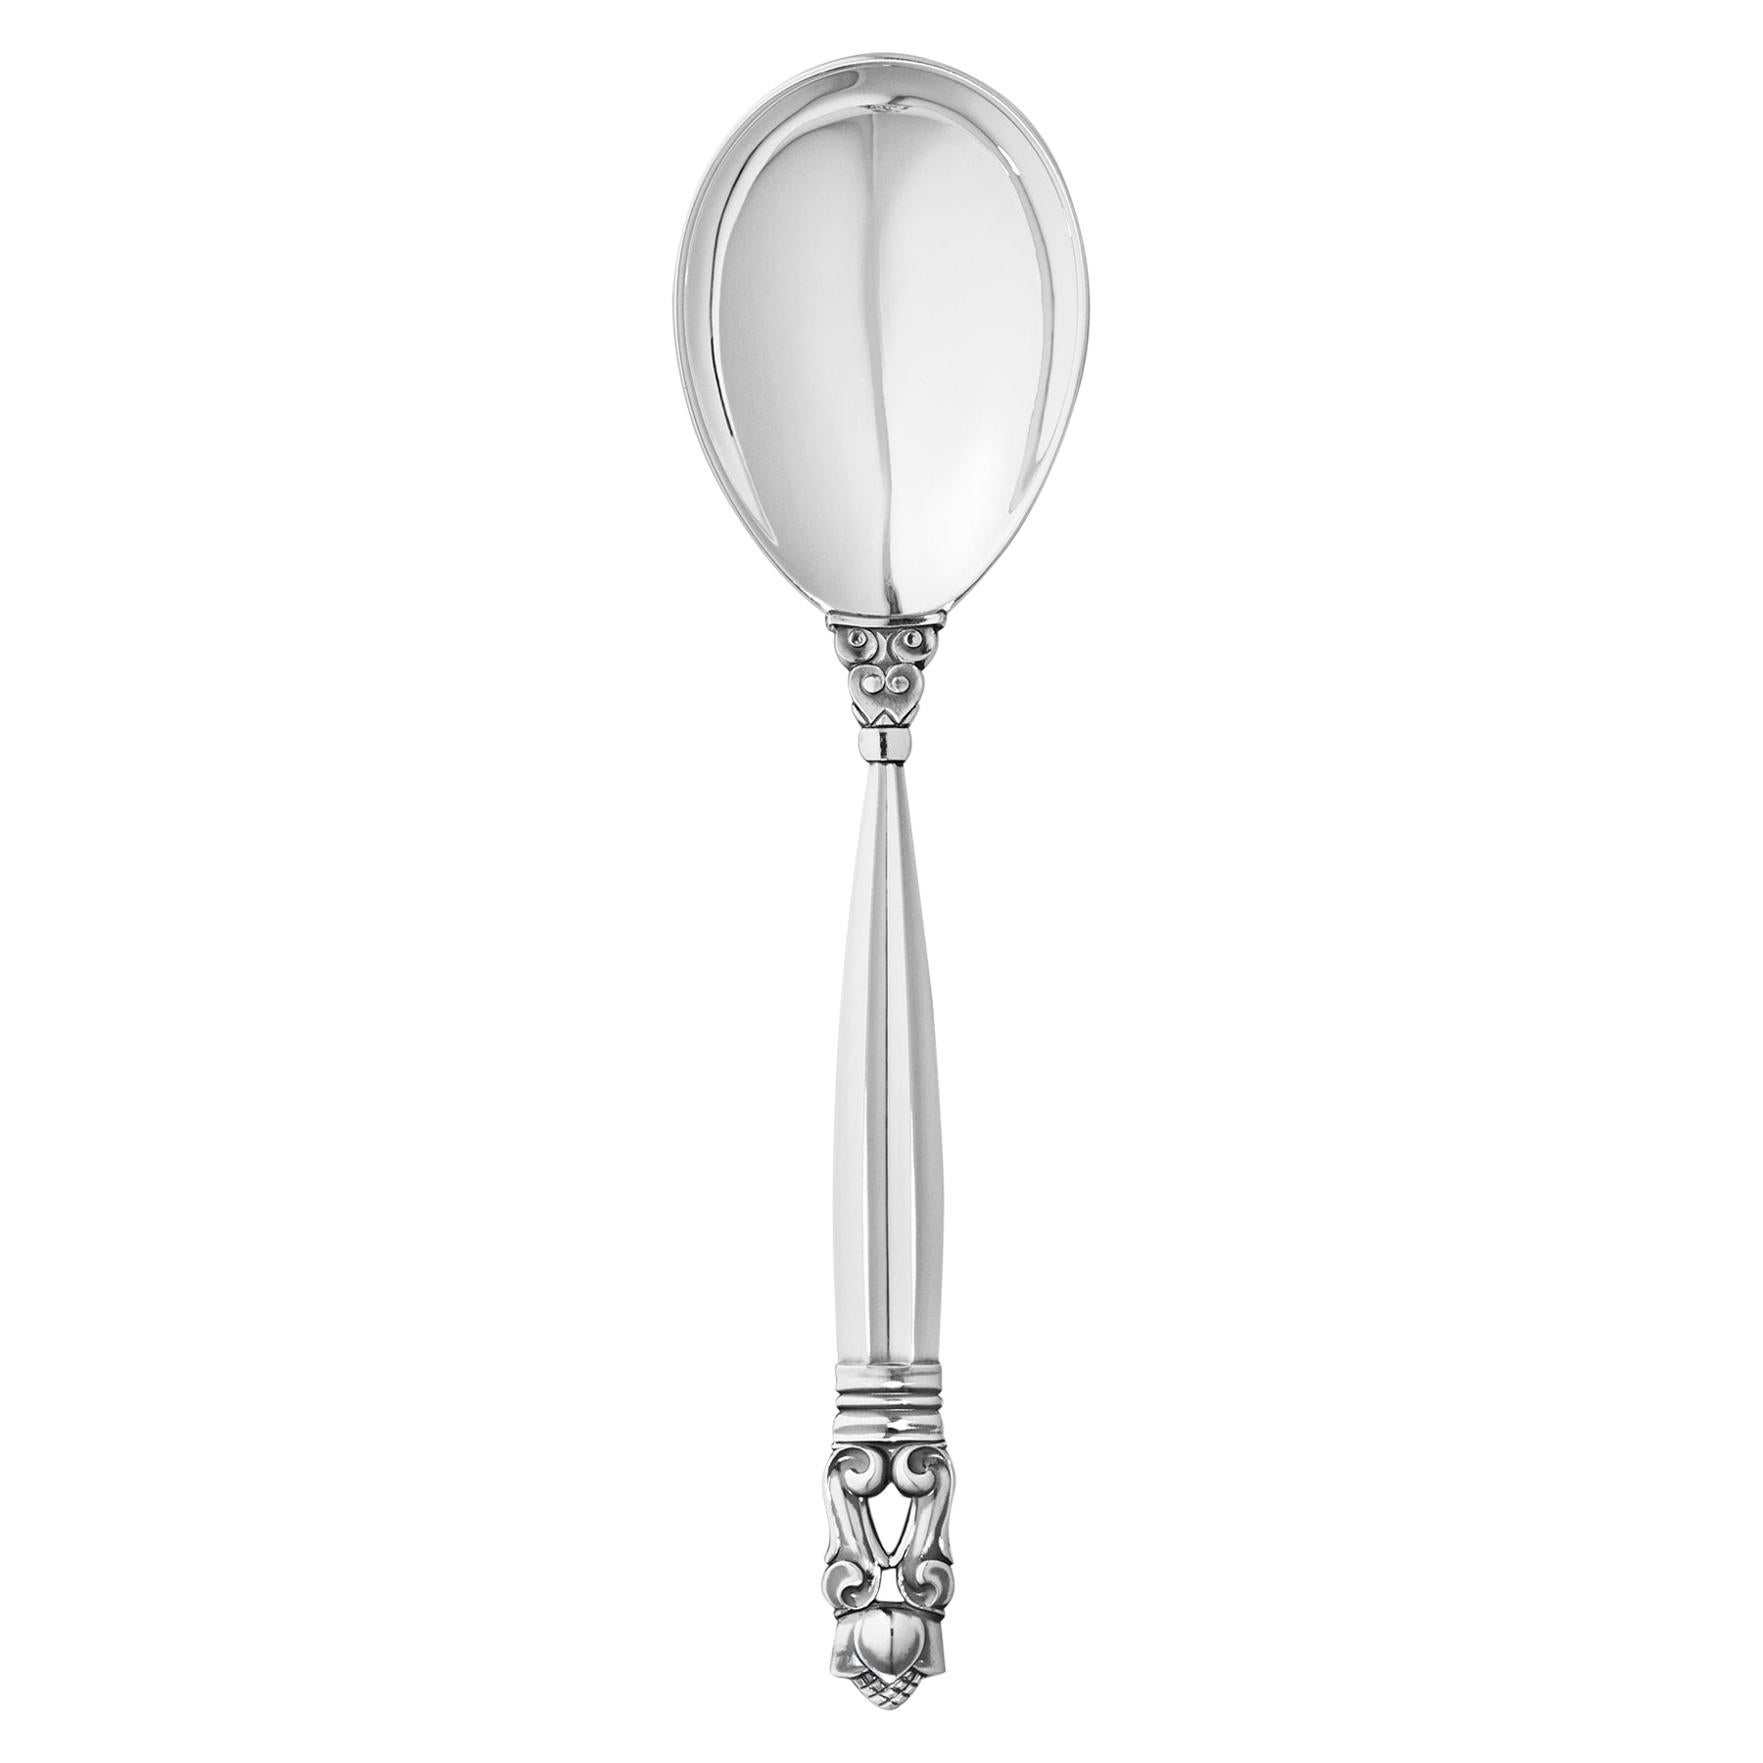 Georg Jensen Handcrafted Sterling Silver Acorn Jam Spoon by Johan Rohde For Sale